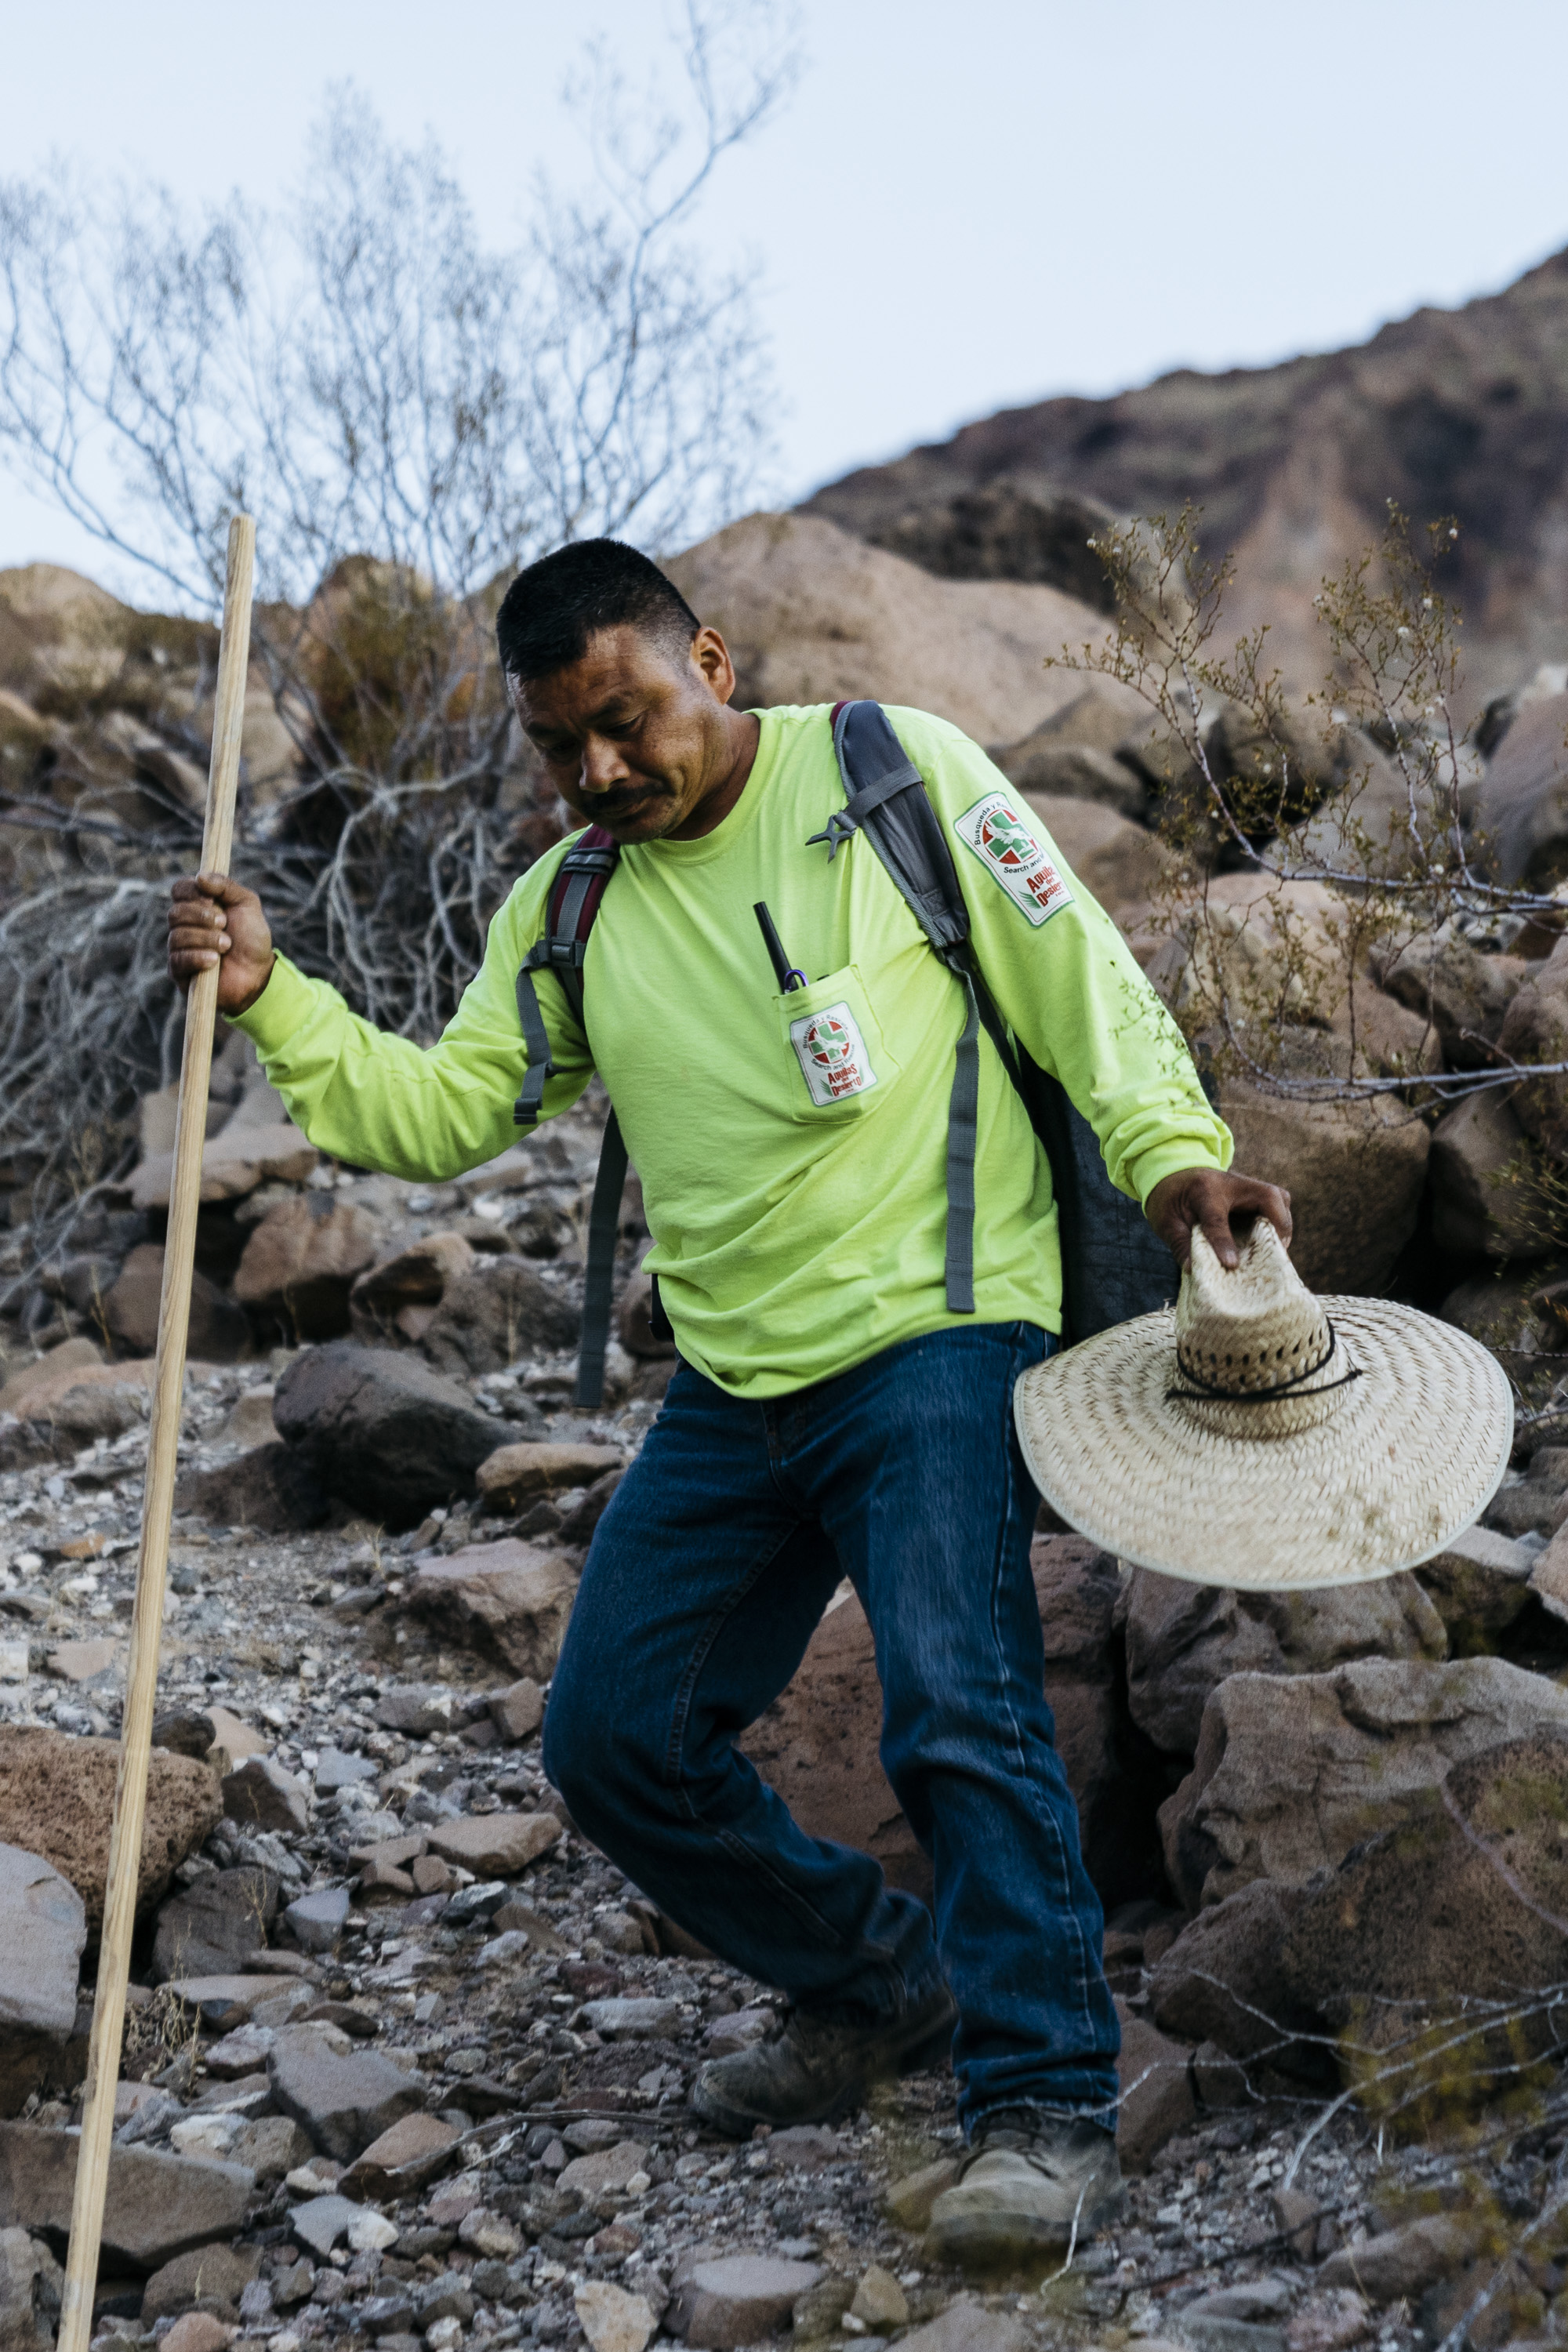  IMAGE CAPTION:  Maro Martinez, a volunteer with Aguilas Del Desierto, descends a wash in the Cabeza Prieta National Wildlife Refuge. Summer temperatures in this part of the Sonoran Desert can reach 120°F. 